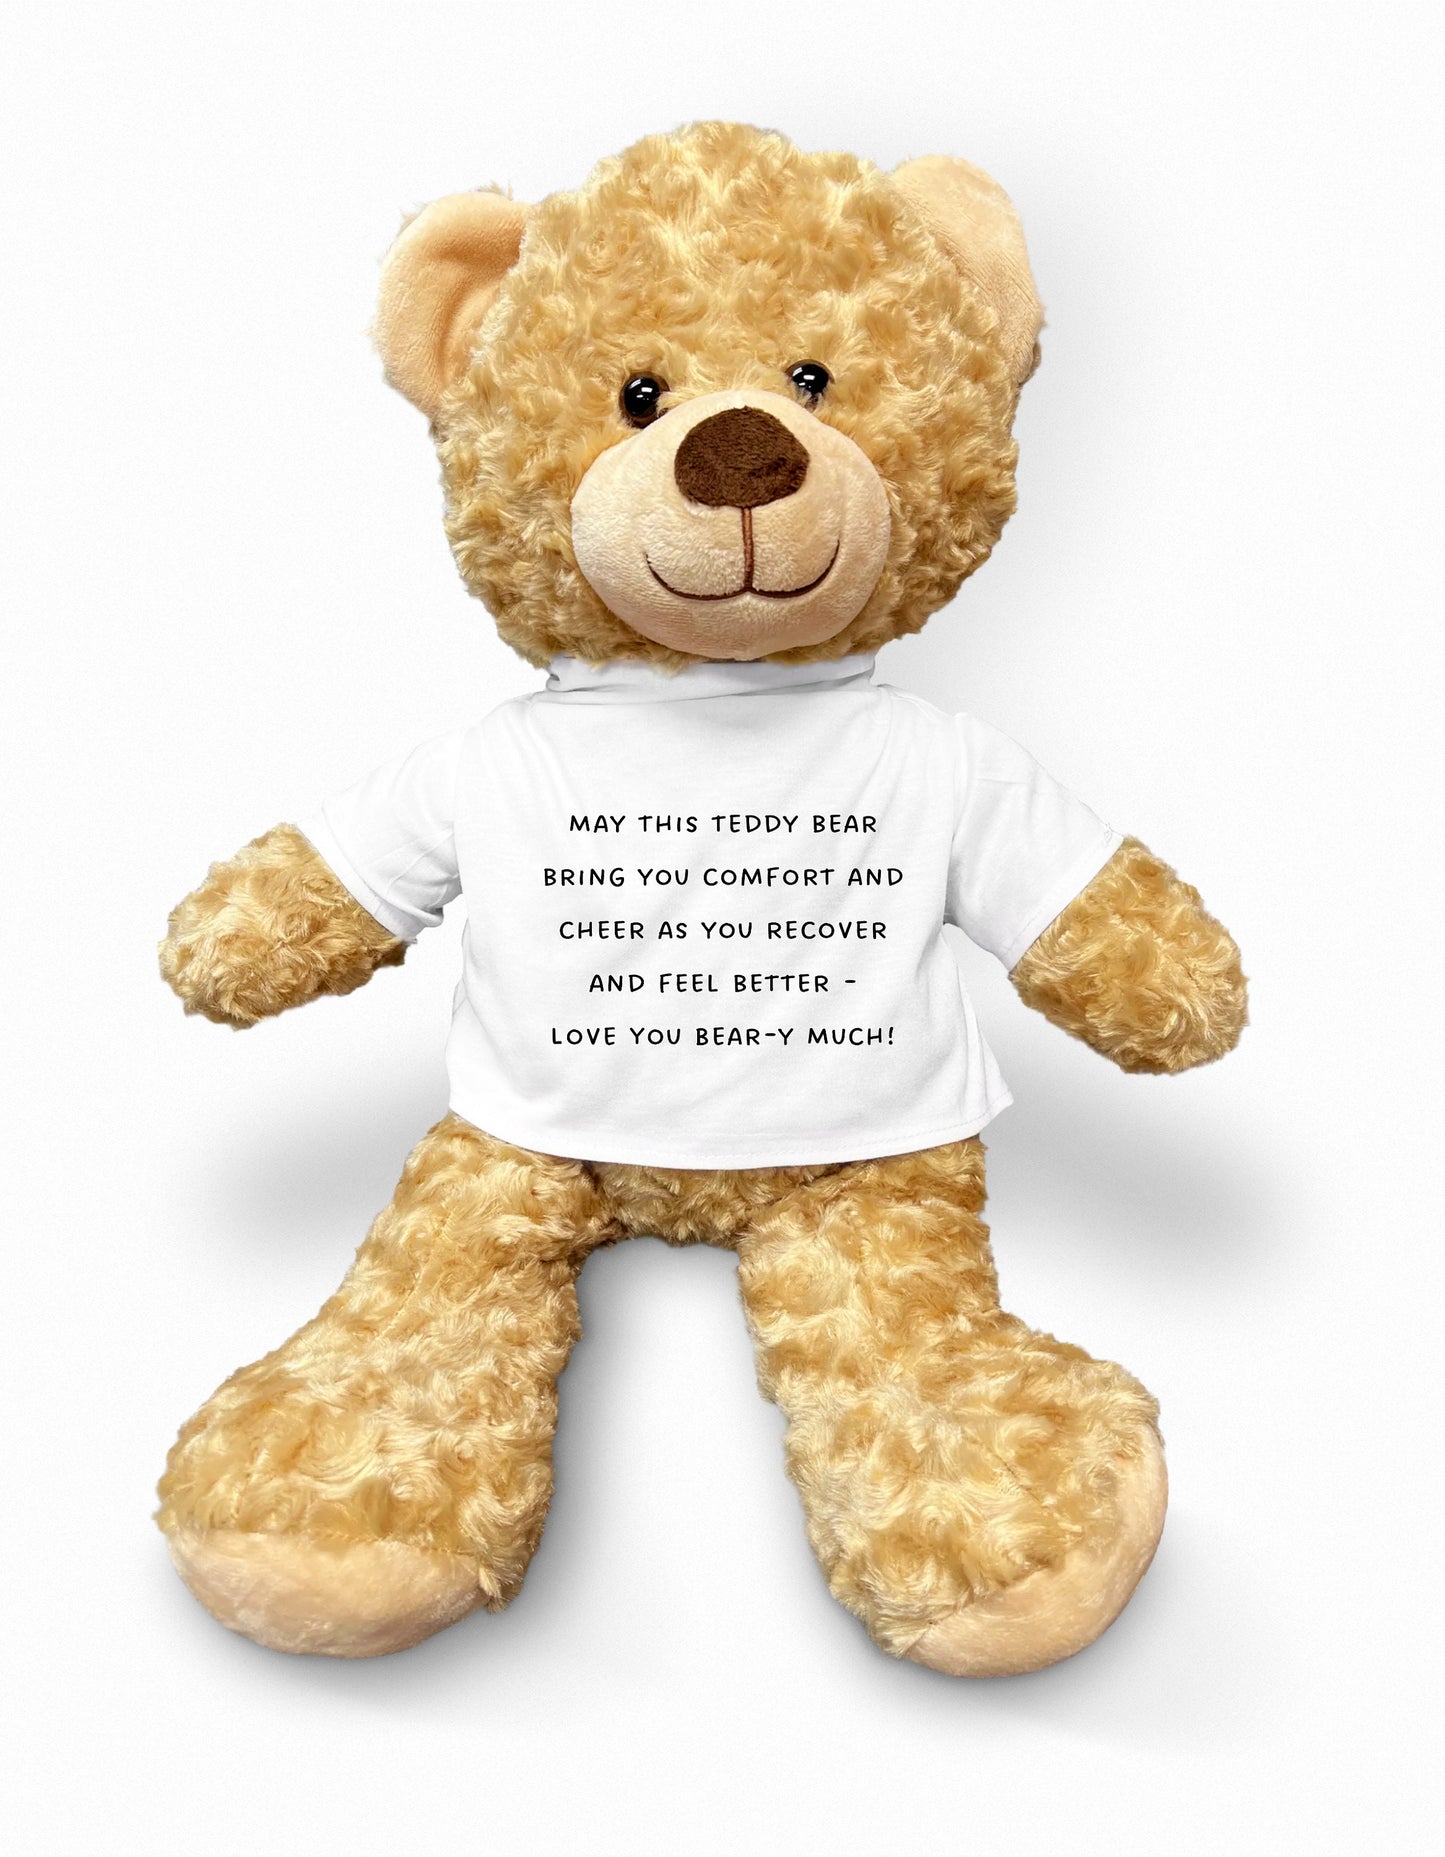 Cuddly Get Well Teddy Bear – Perfect Gift for a Speedy Recovery! Get Well Teddy Bear, Teddy Bear For Men, Get Well Soon, Cheerful Teddy Bear